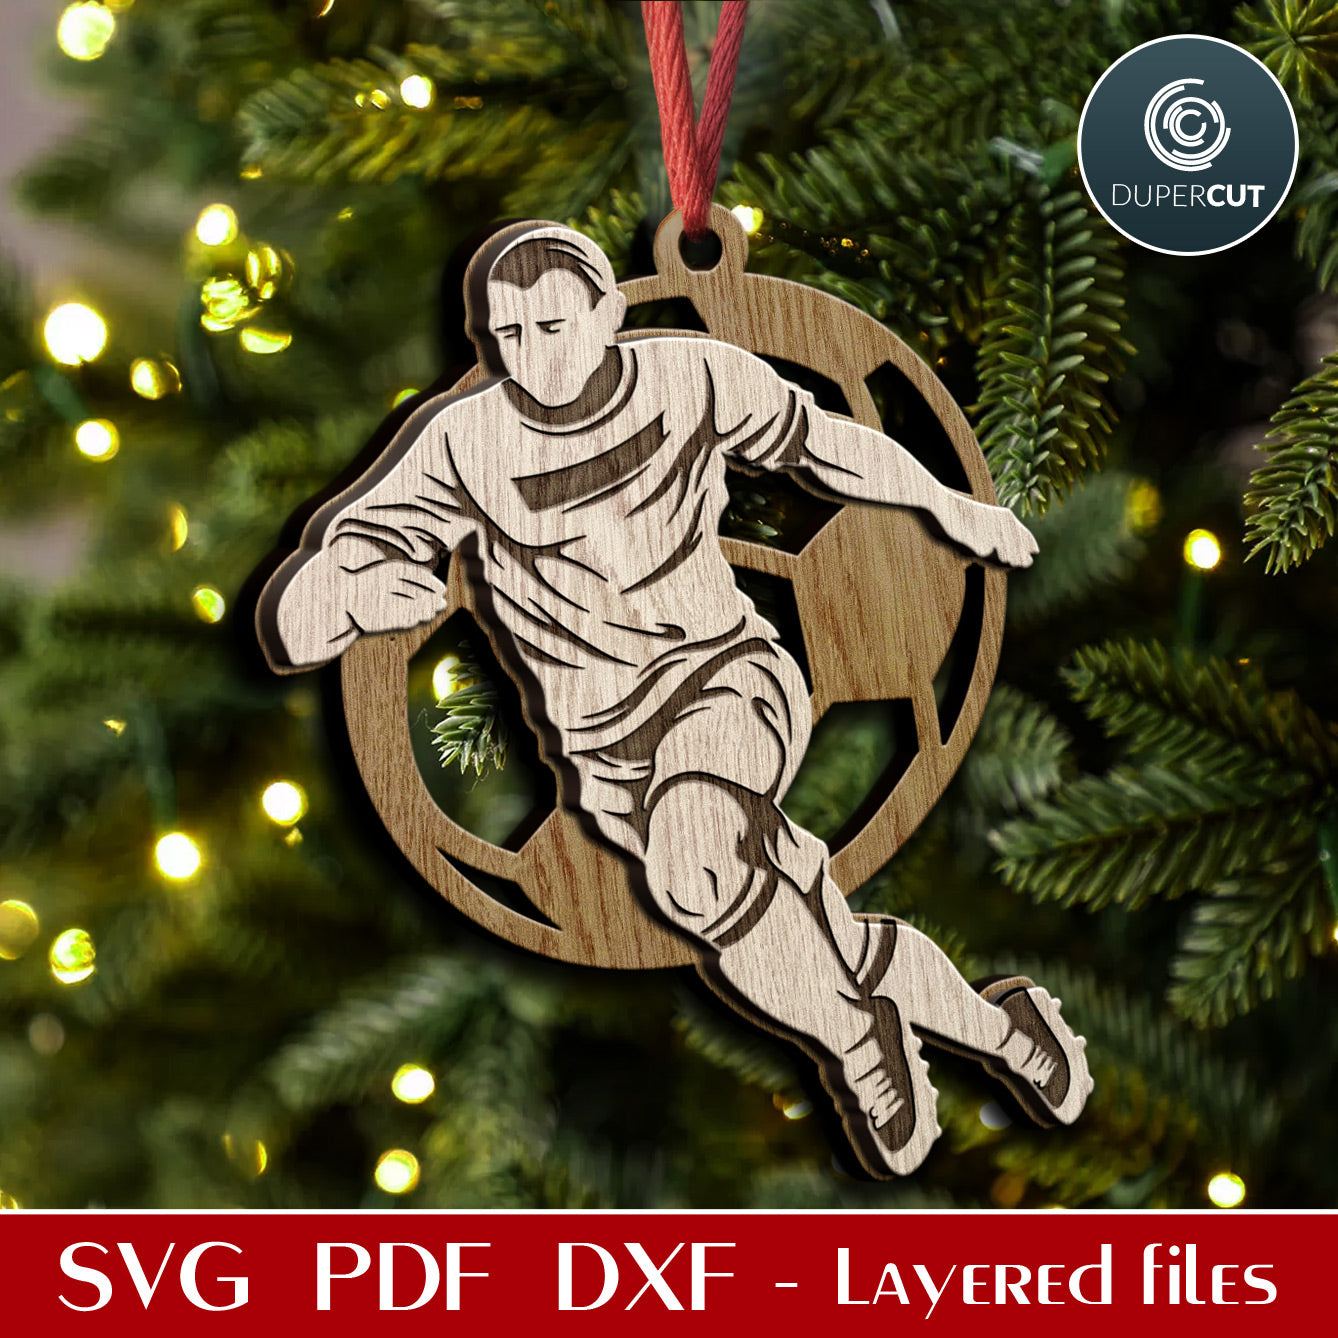 Soccer / football player ornaments layered cut files template, Christmas tree decoration SVG files for Glowforge, Xtool, CNC laser machines, Cricut, by www.DuperCut.com